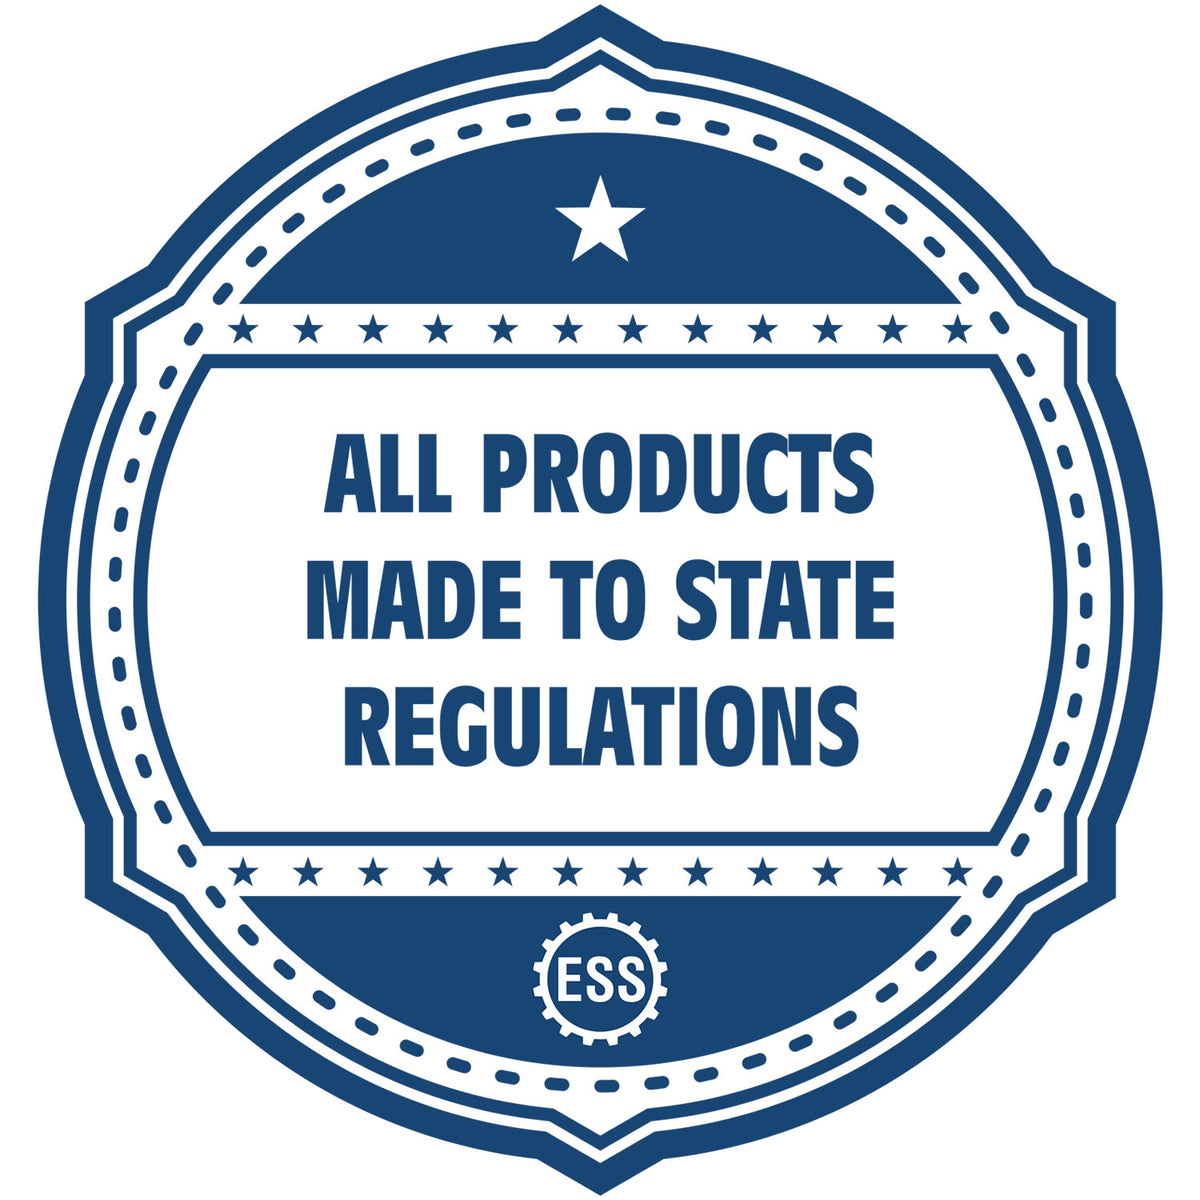 An icon or badge element for the Digital Connecticut PE Stamp and Electronic Seal for Connecticut Engineer showing that this product is made in compliance with state regulations.